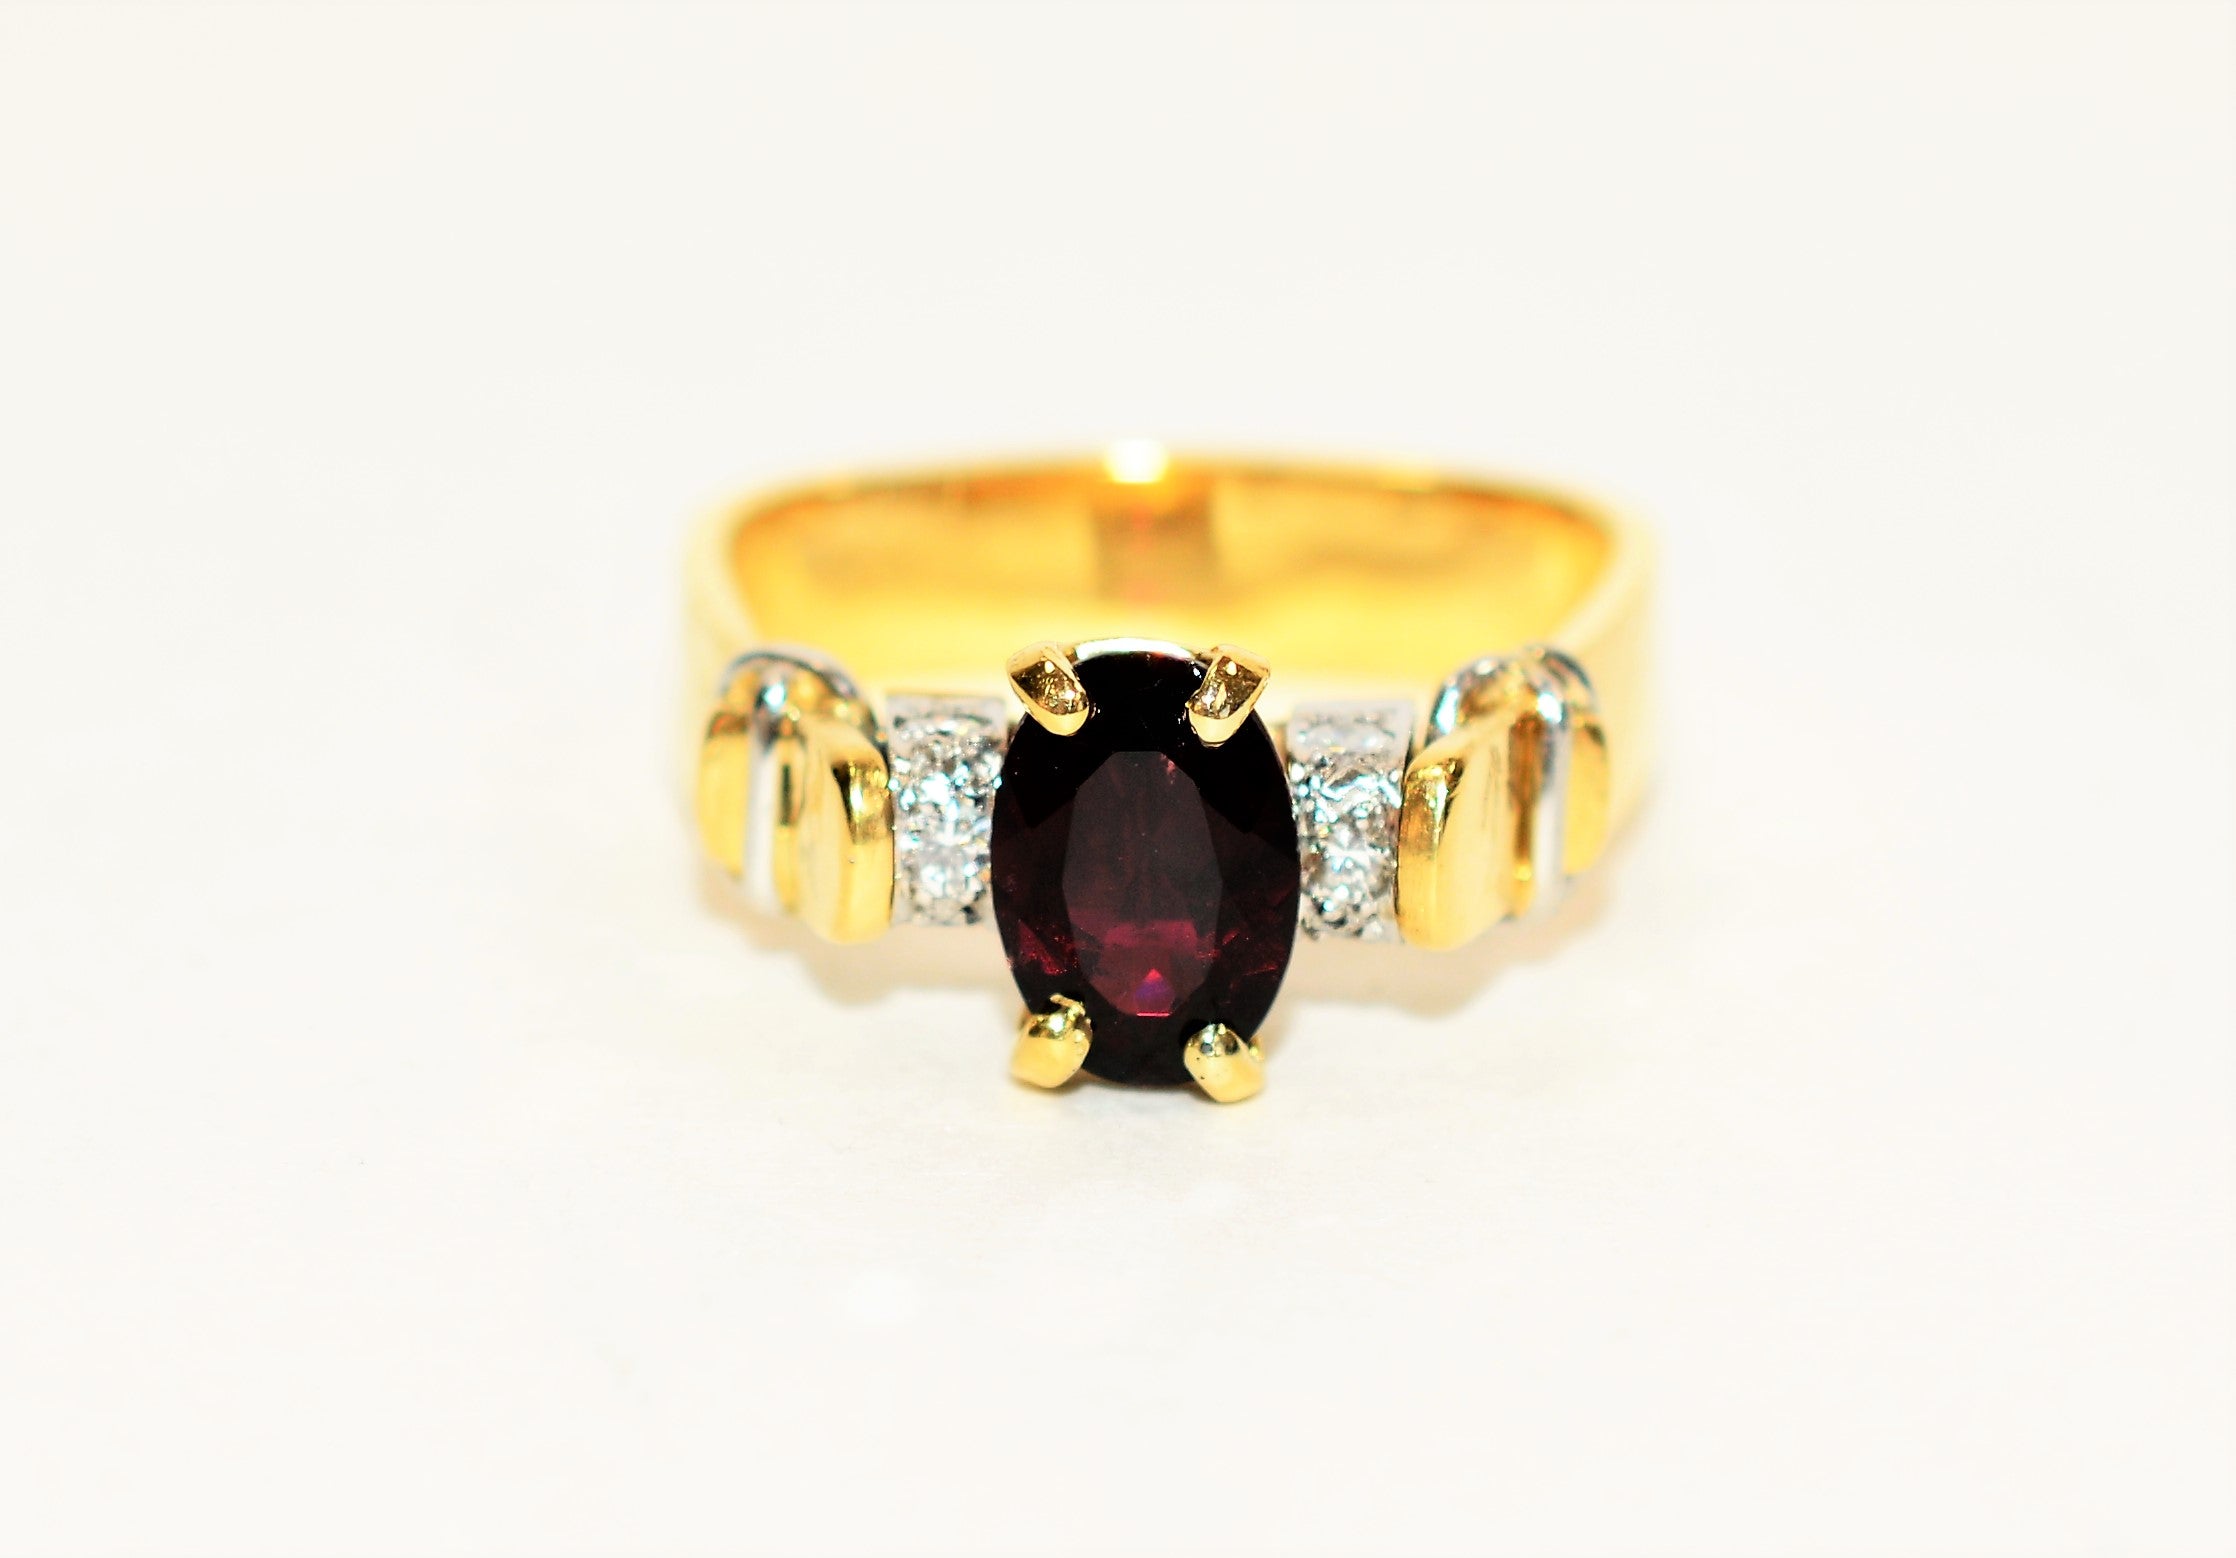 Natural Spinel & Diamond Ring 18K Solid Gold 1.63tcw Gemstone Ring Cocktail Ring Red Spinel Ring Statement Ring Vintage Ring June Birthstone